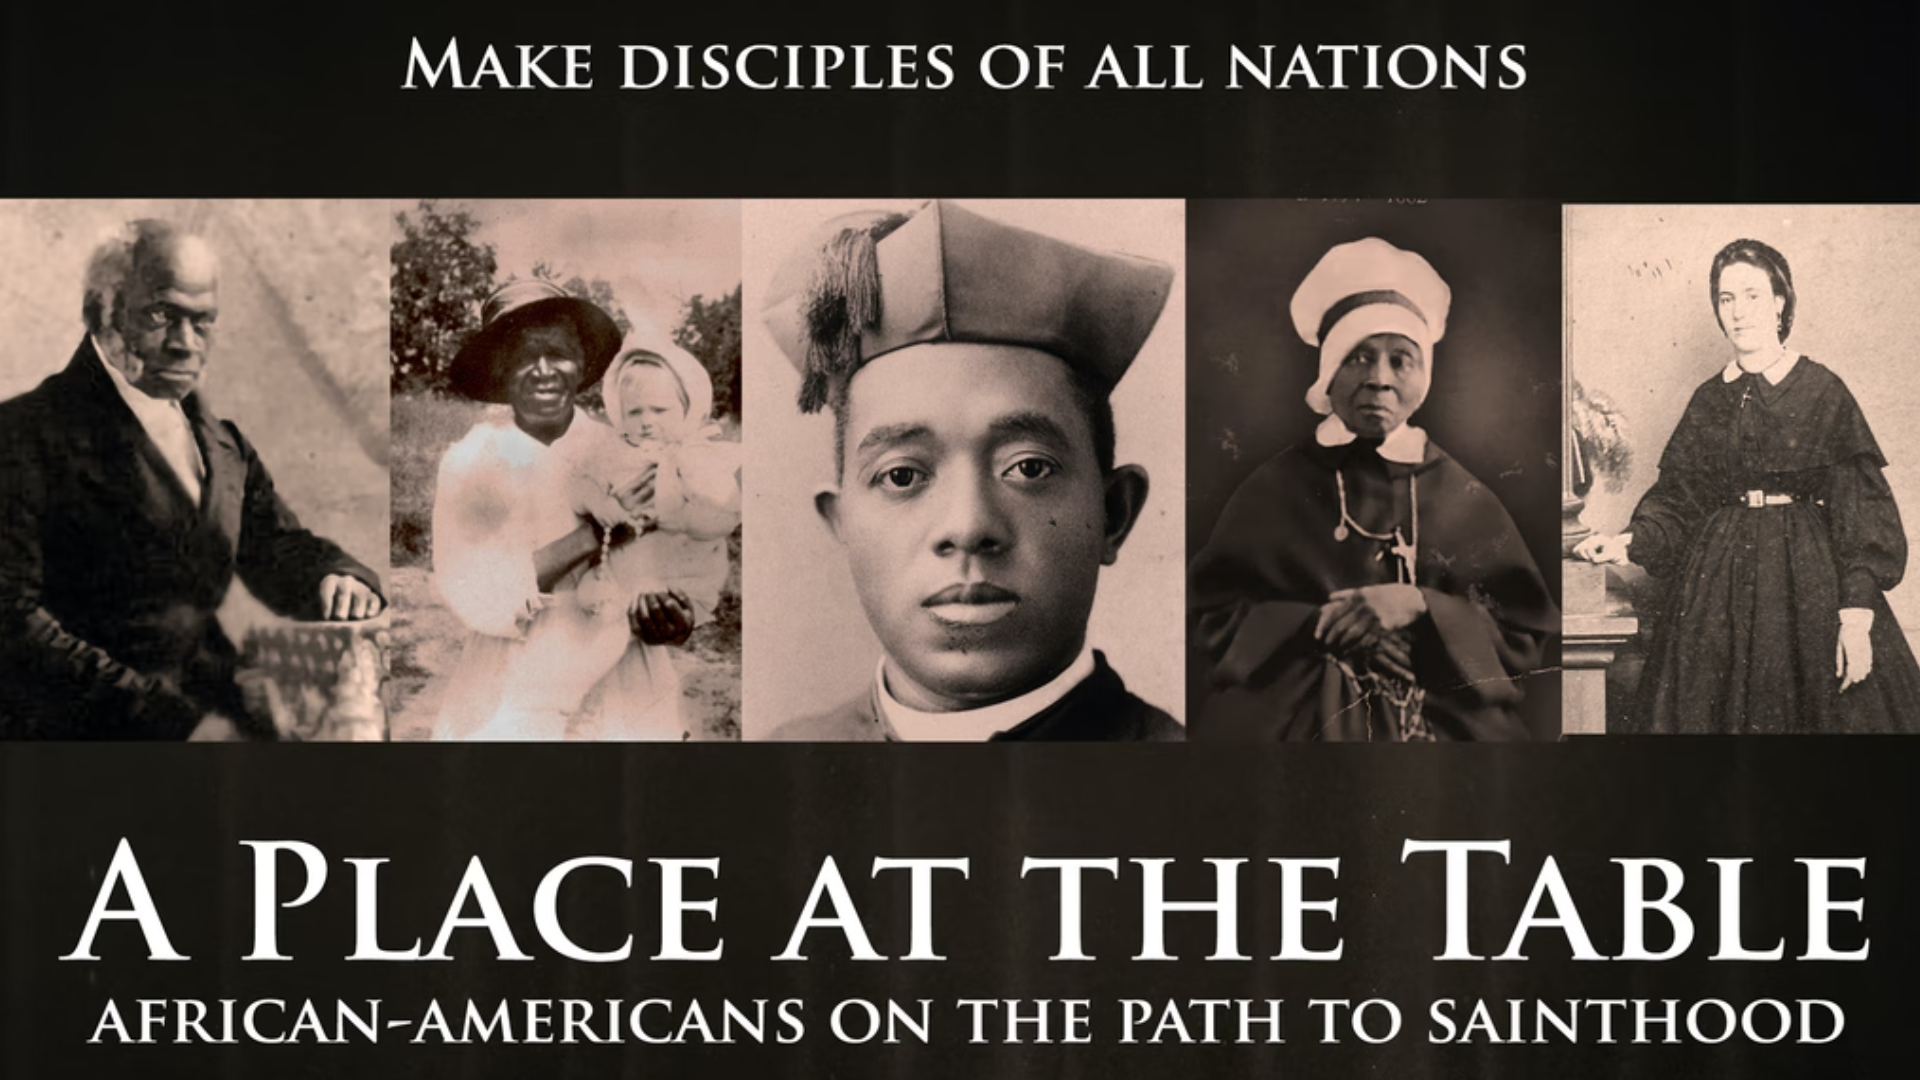 Review: "A Place at the Table" inspires hope with US Black Catholic saints-to-be